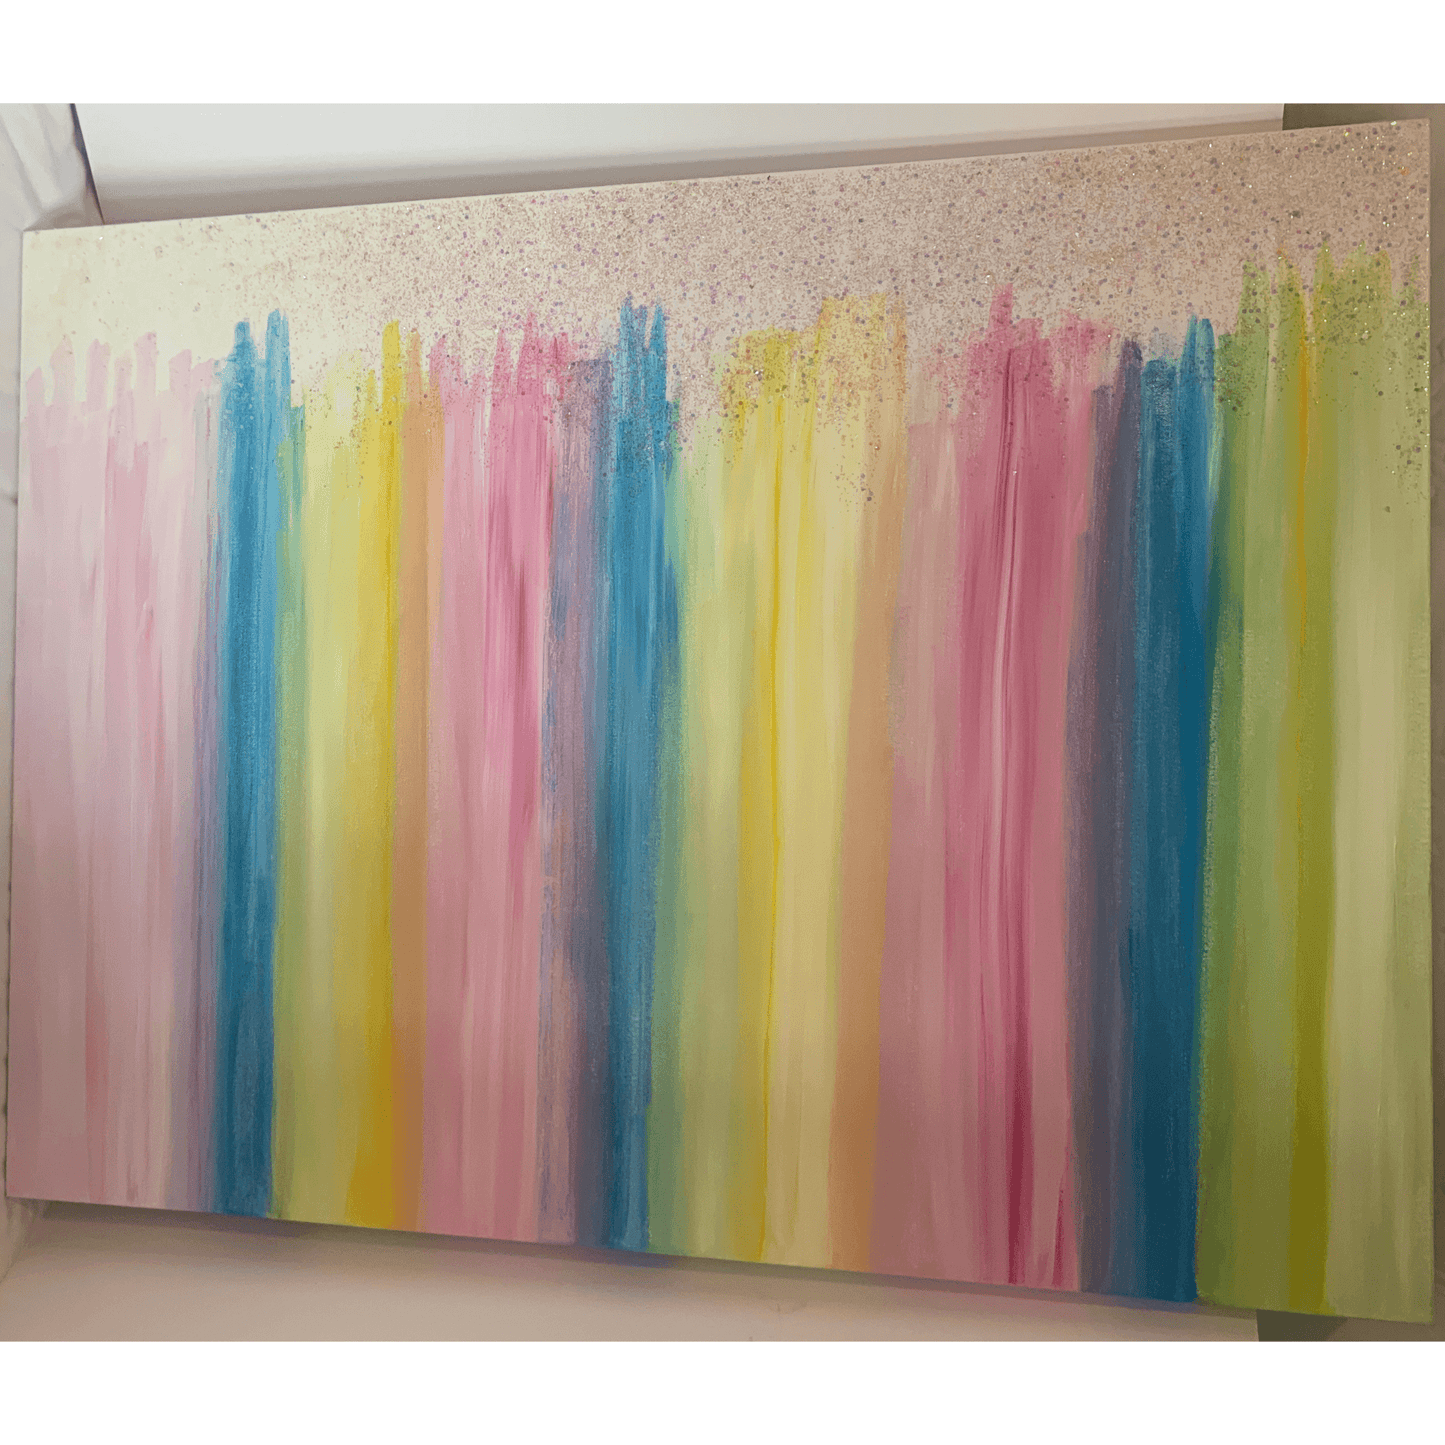 LETS PARTY- Fun Abstract Modern Acrylic Painting